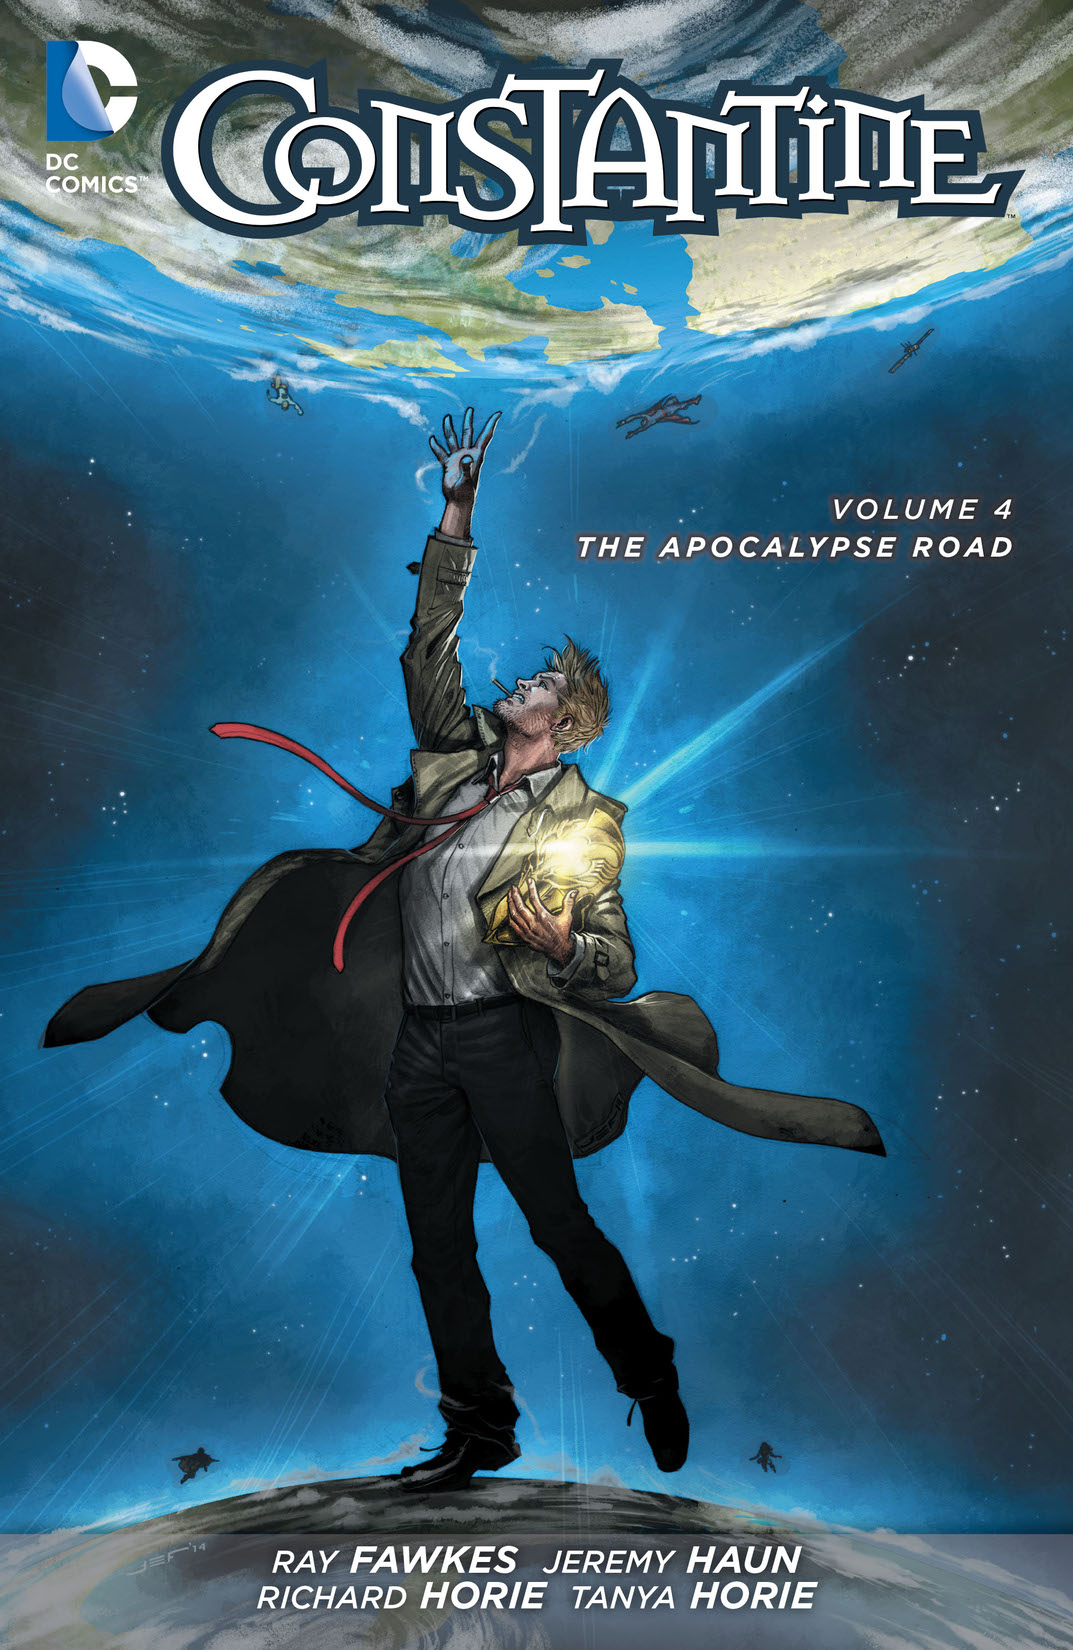 Constantine Vol. 4: The Apocalypse Road preview images